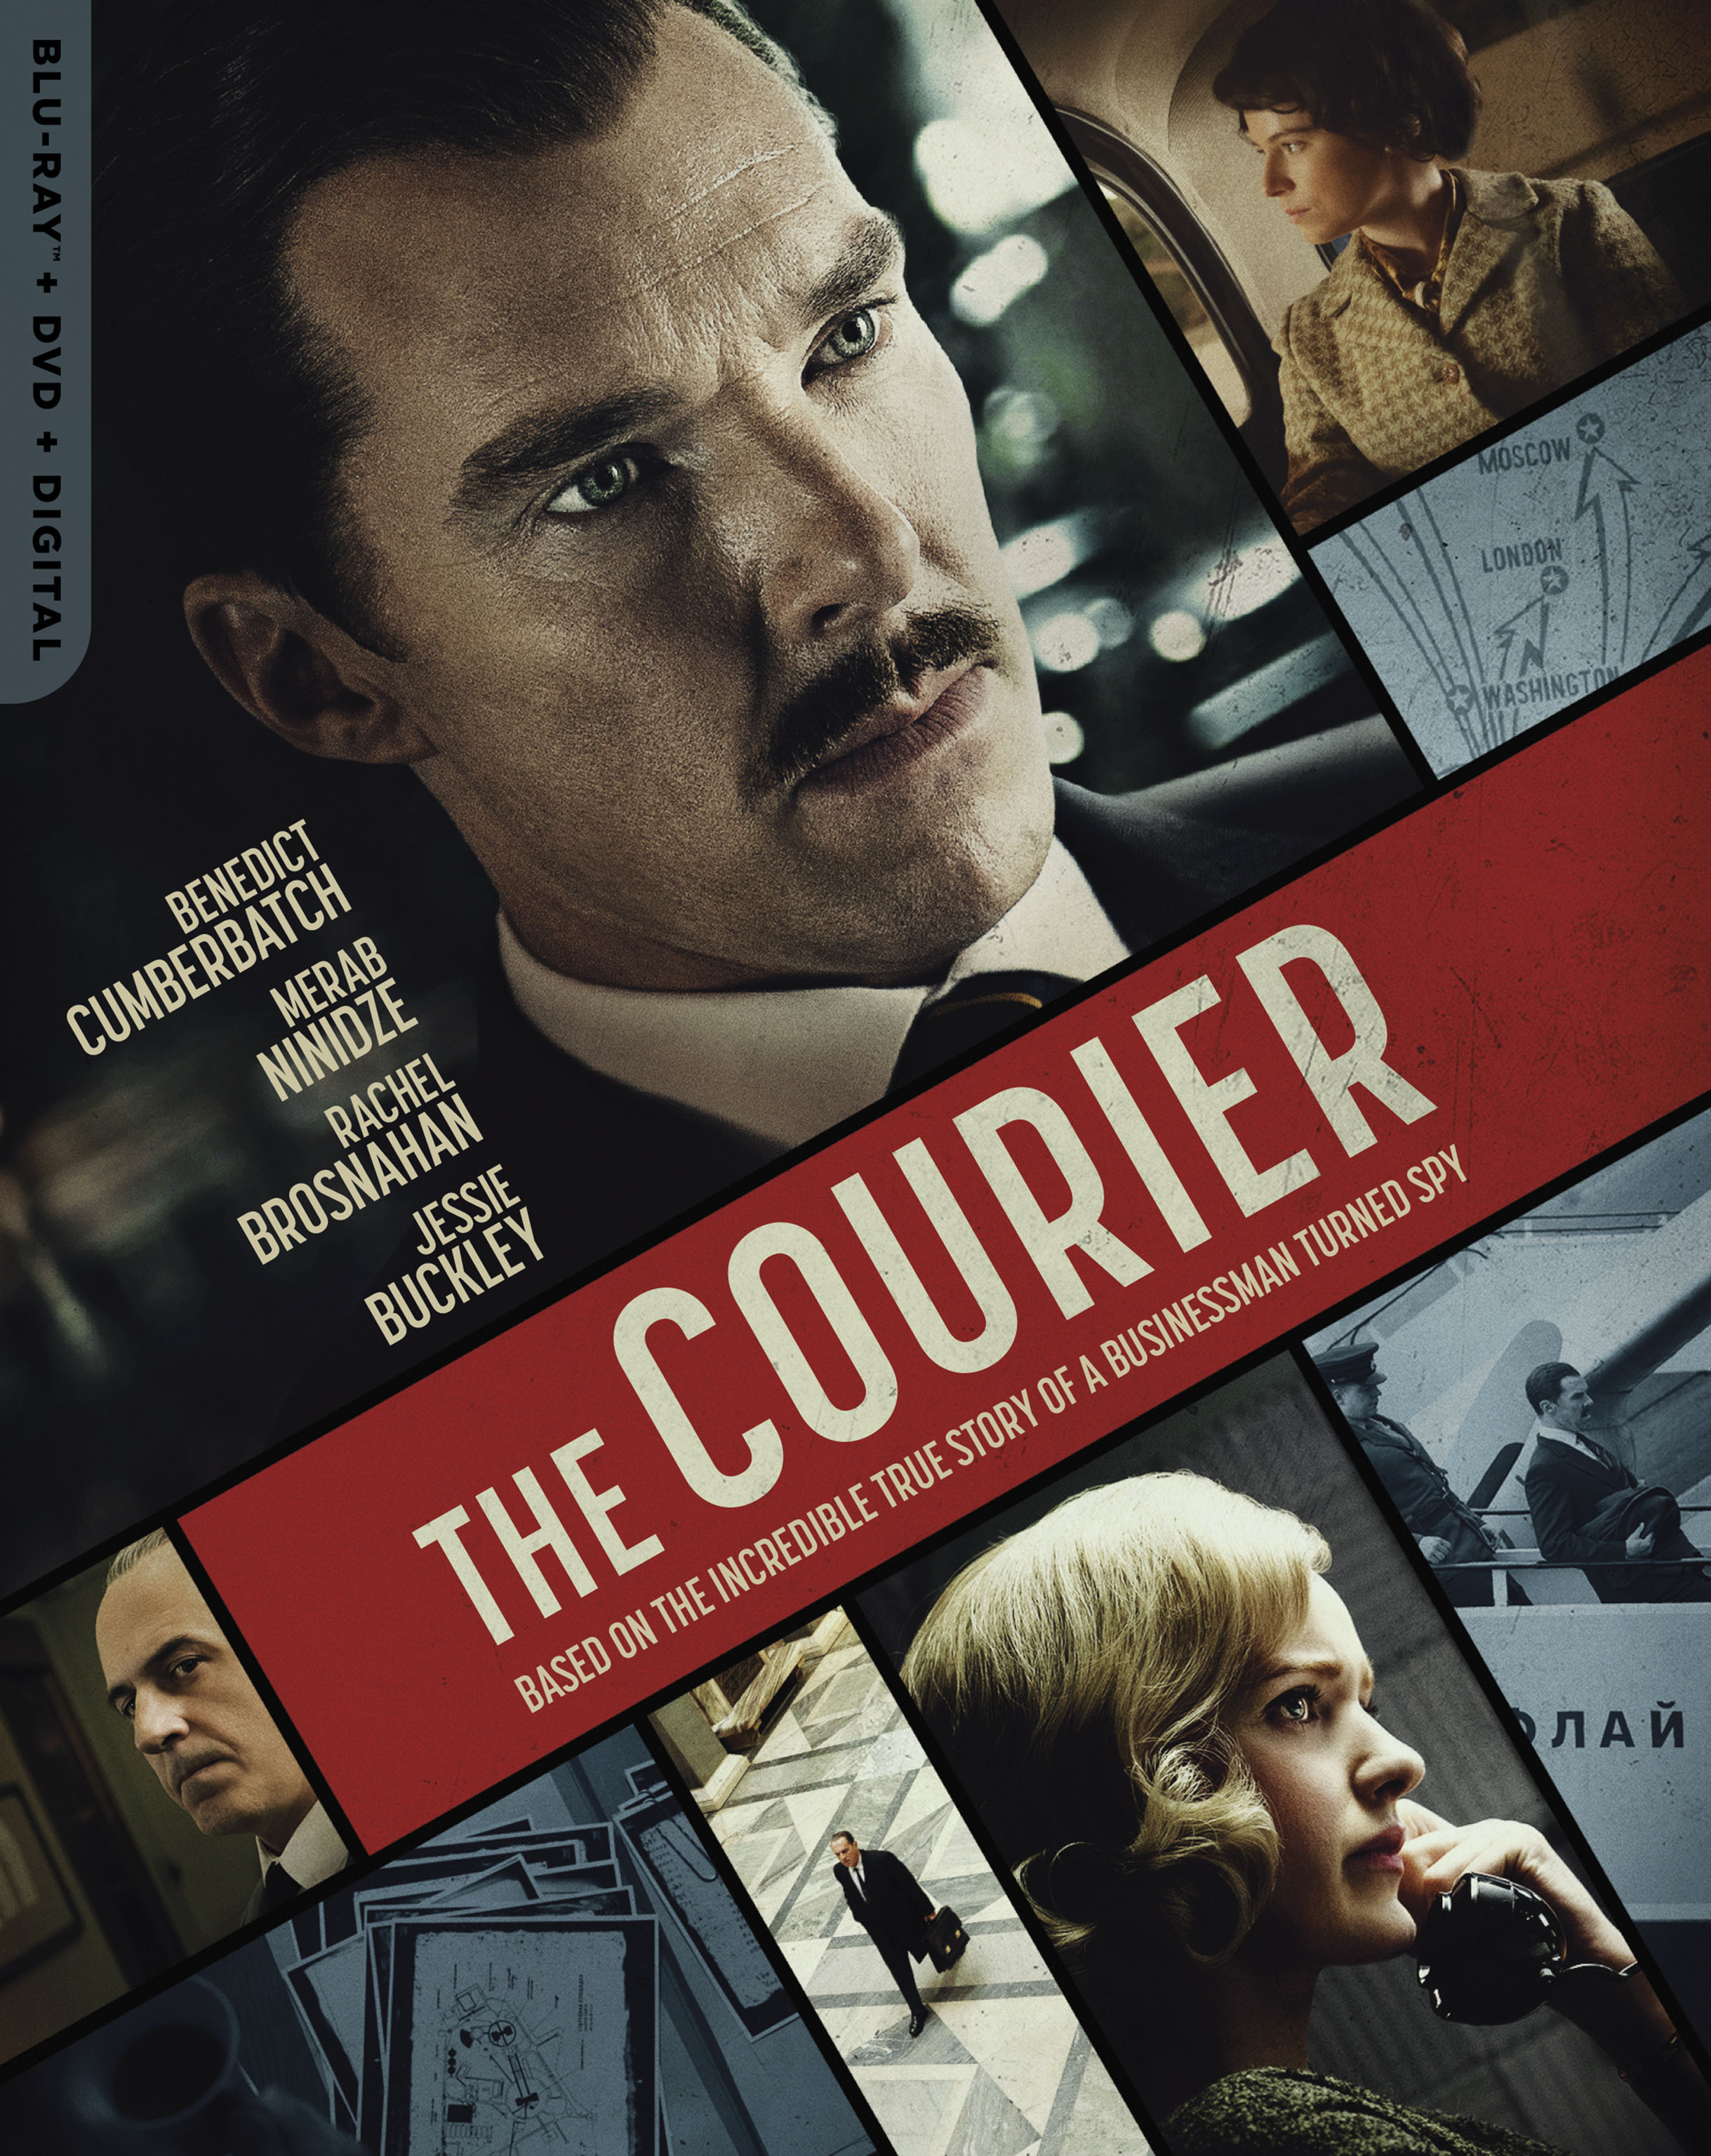 The Courier (with DVD) - Blu-ray [ 2020 ]  - Thriller Movies On Blu-ray - Movies On GRUV